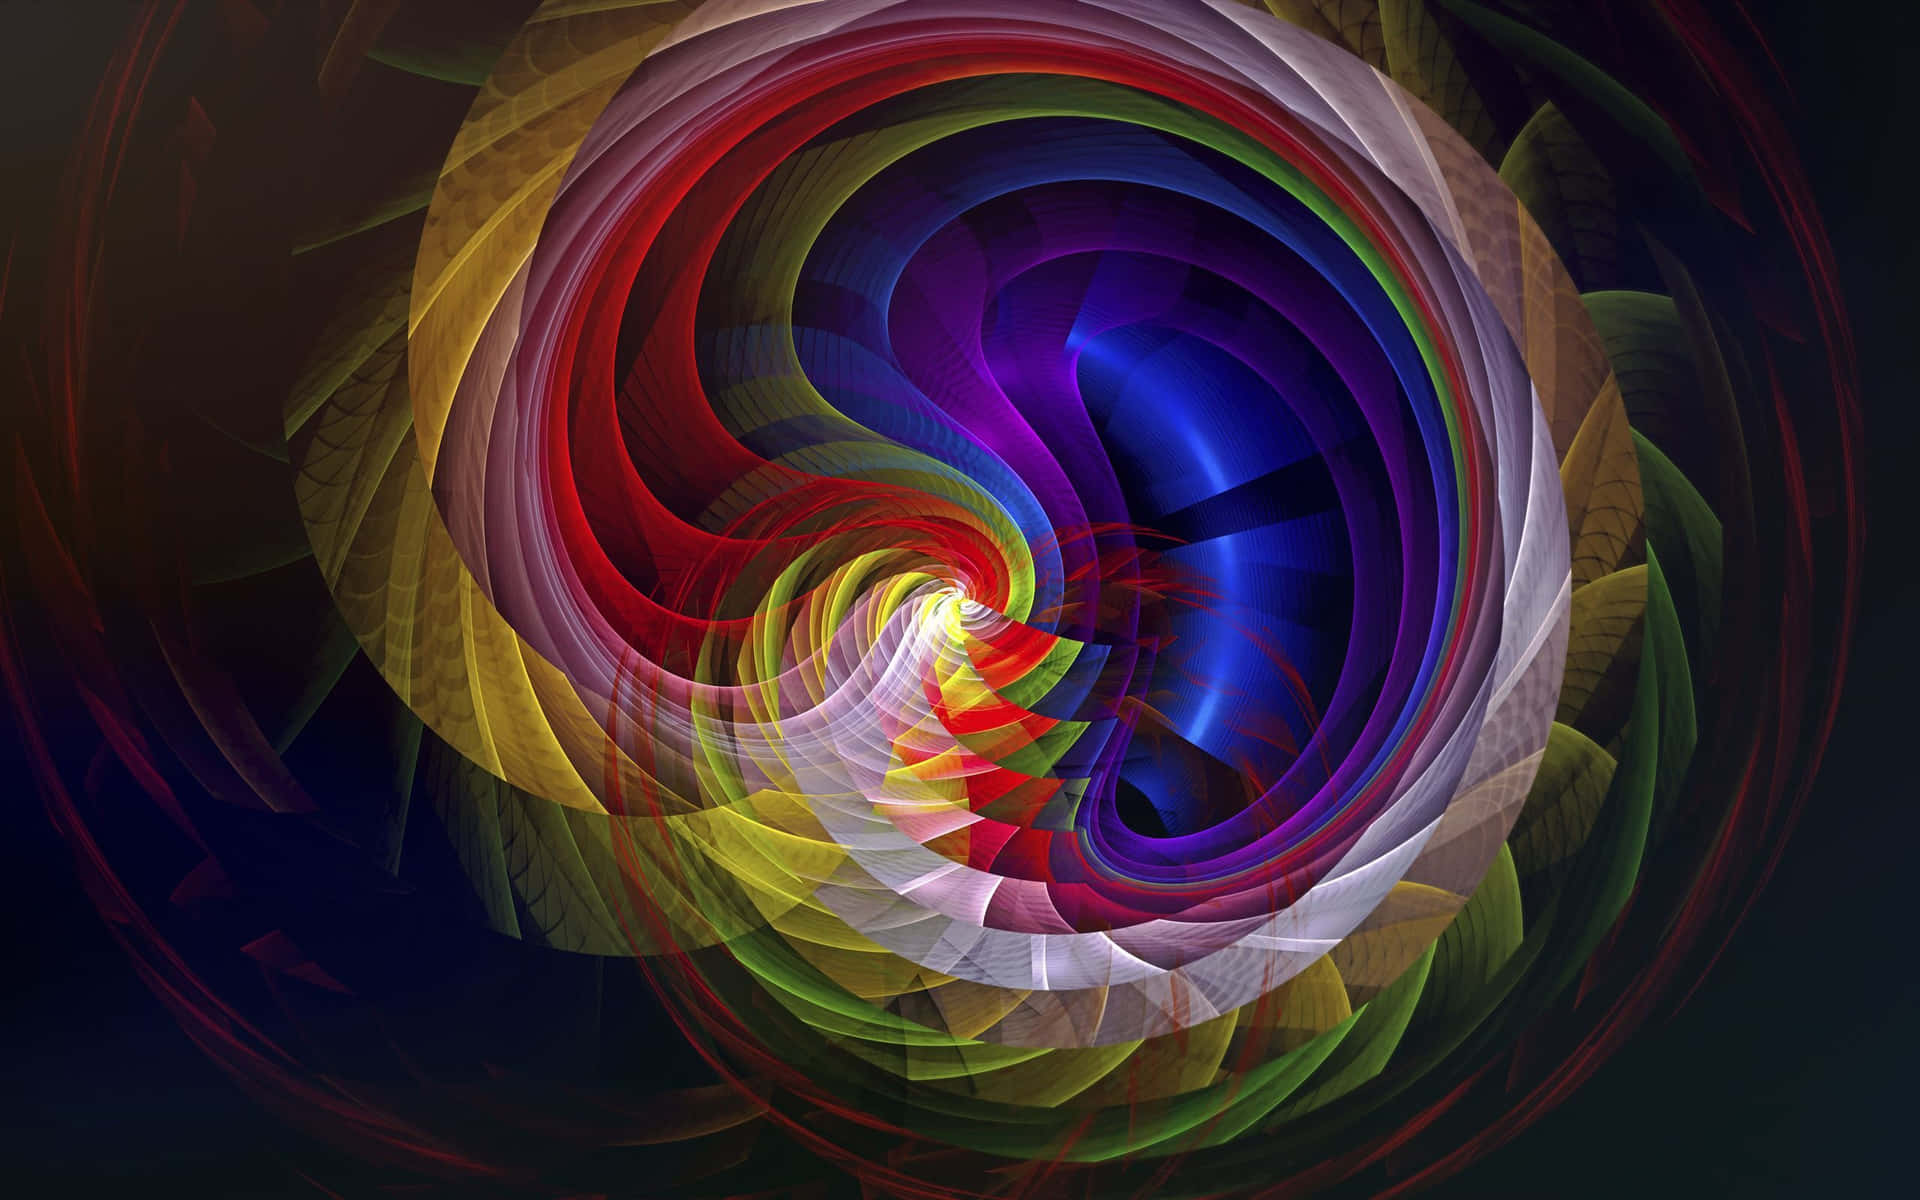 Get lost in the beauty of a colorful swirl Wallpaper